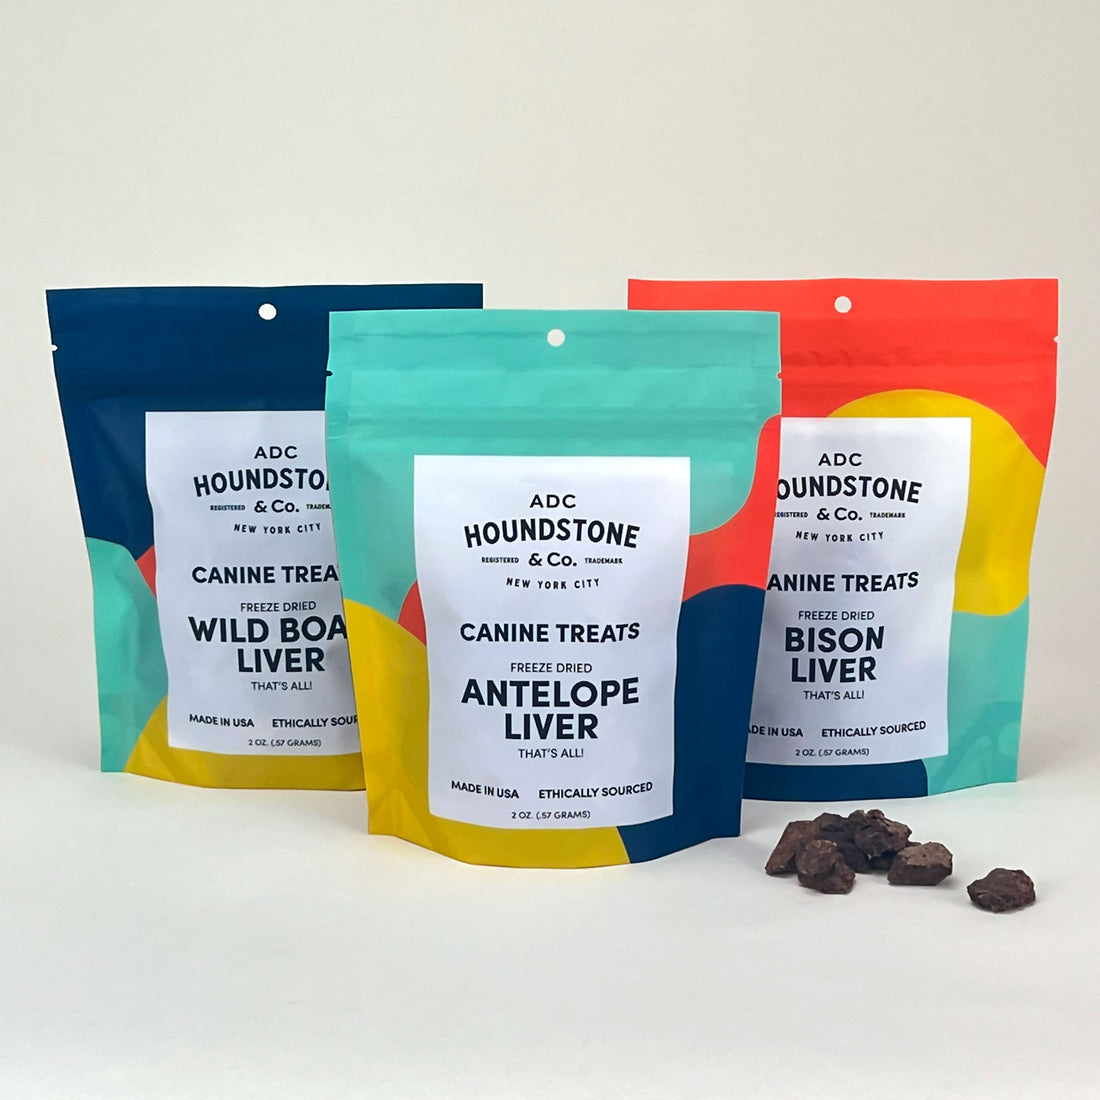 Houndstone's Freeze Dried Dog Treats Stand Out